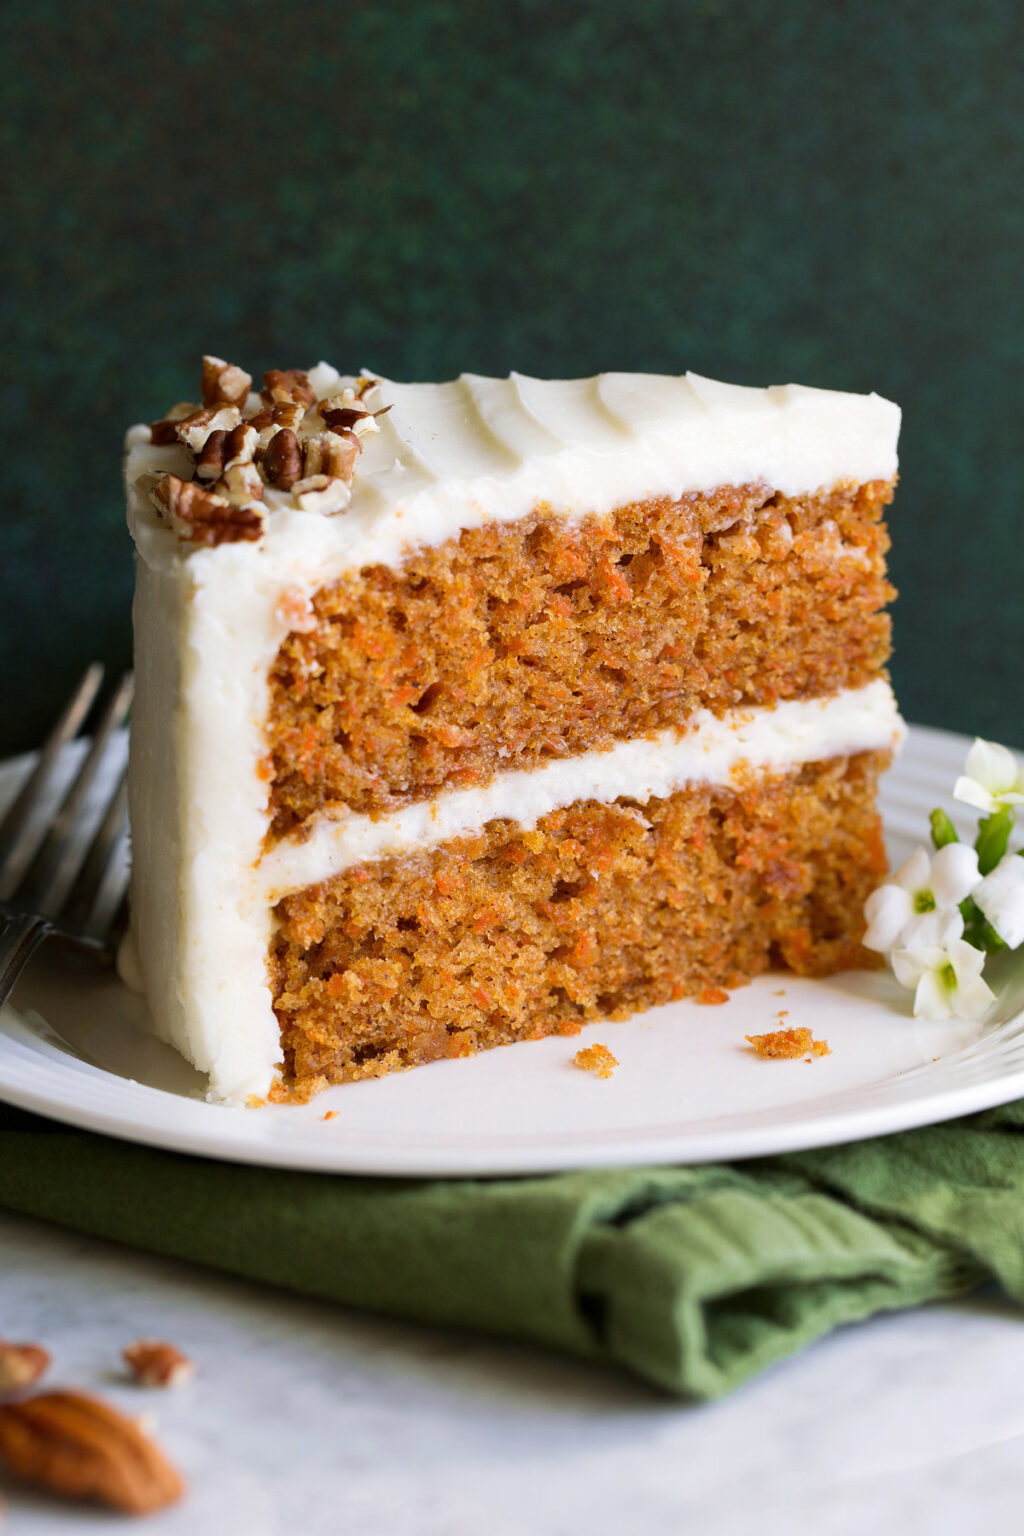 Best Carrot Cake Recipe - Cooking Classy